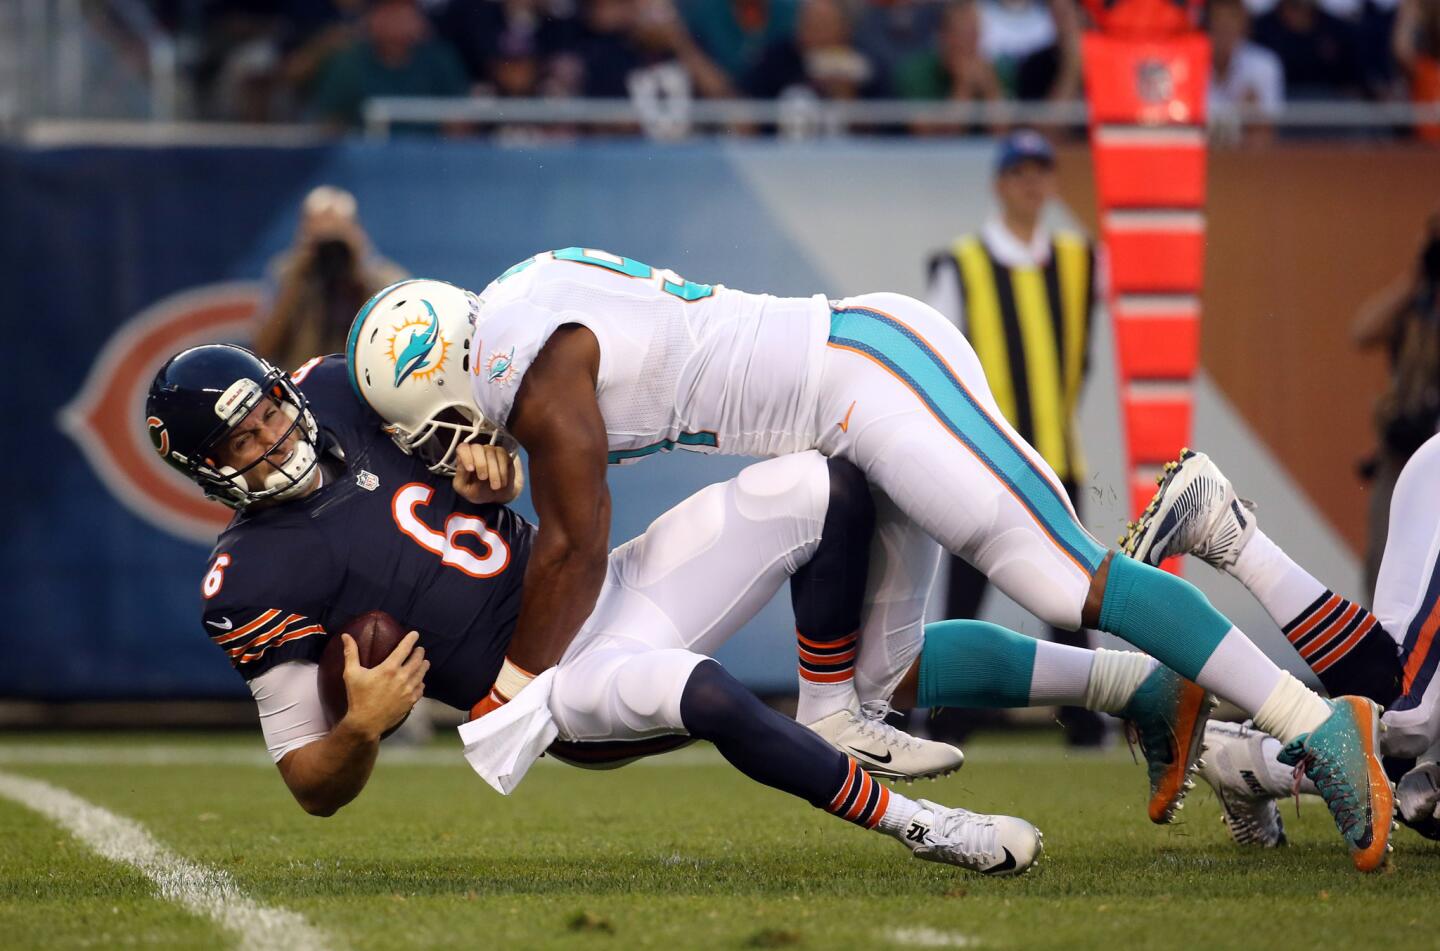 Dolphins defensive end Cameron Wake sacks Jay Cutler but the play was overturned on a penalty in the second quarter of a preseason game.